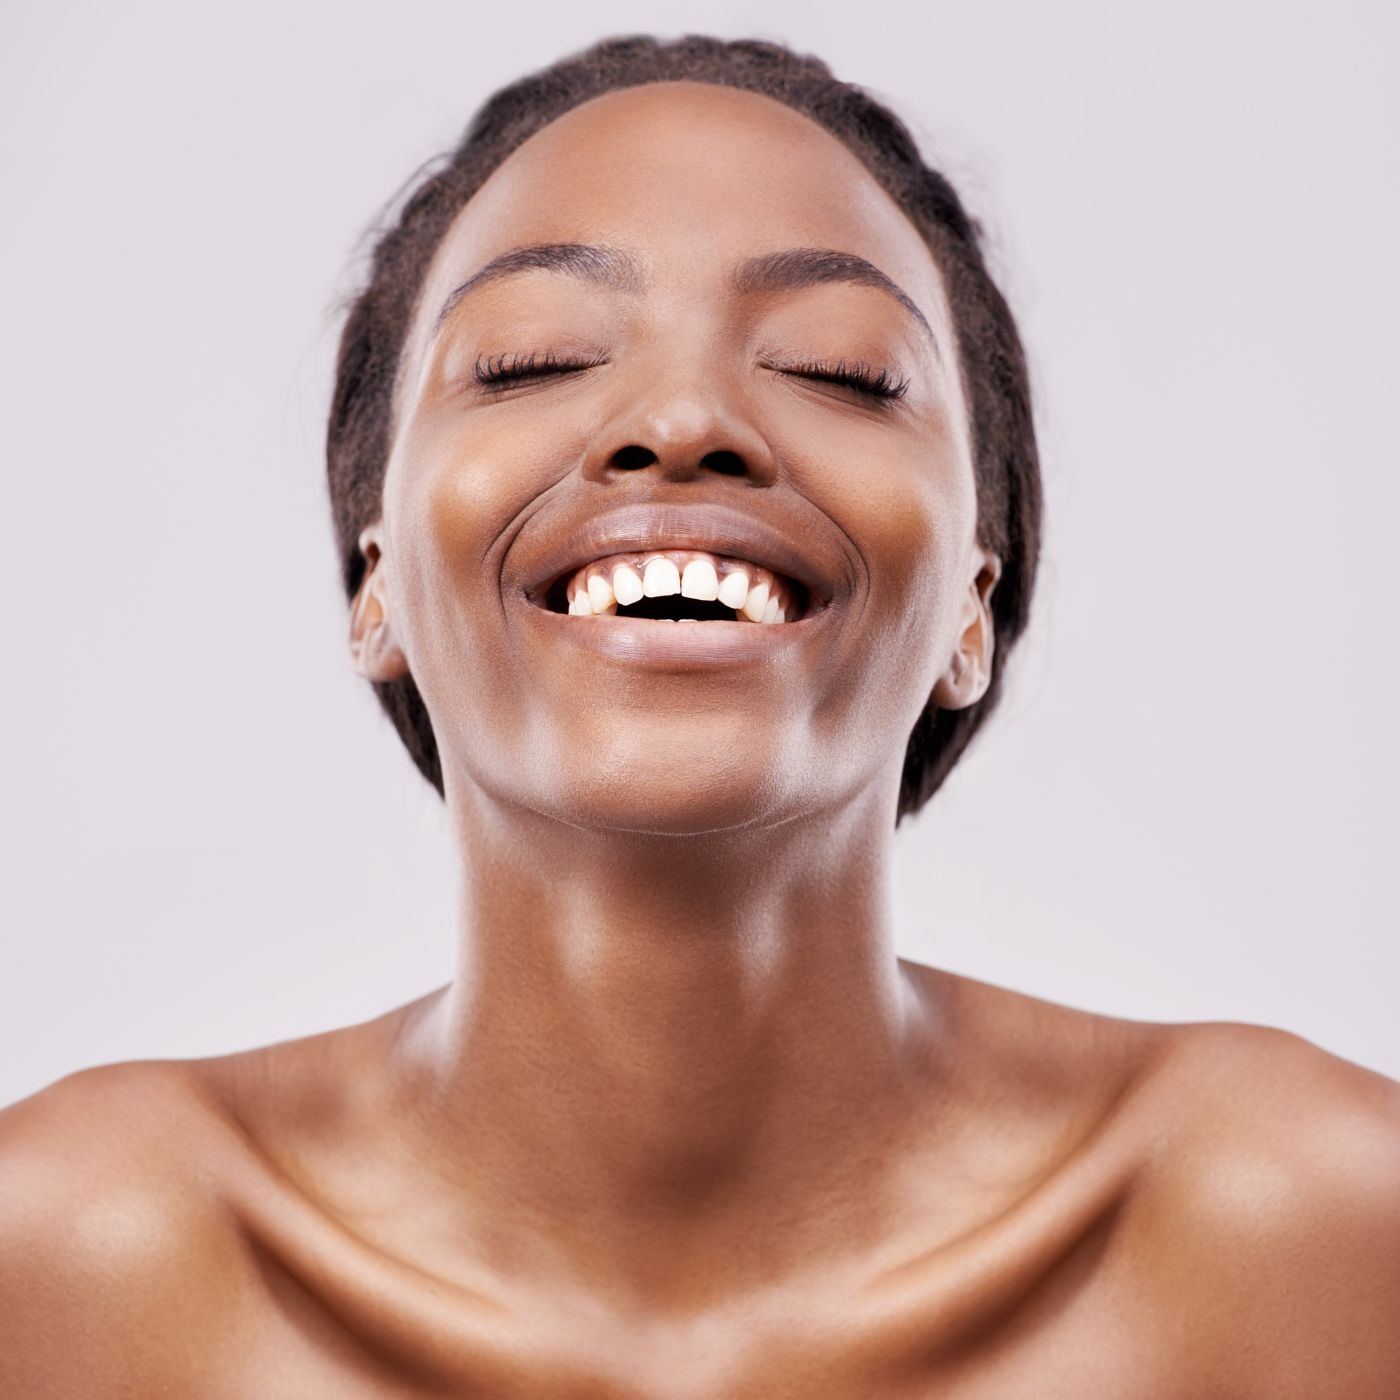 7 habits of people with great skin